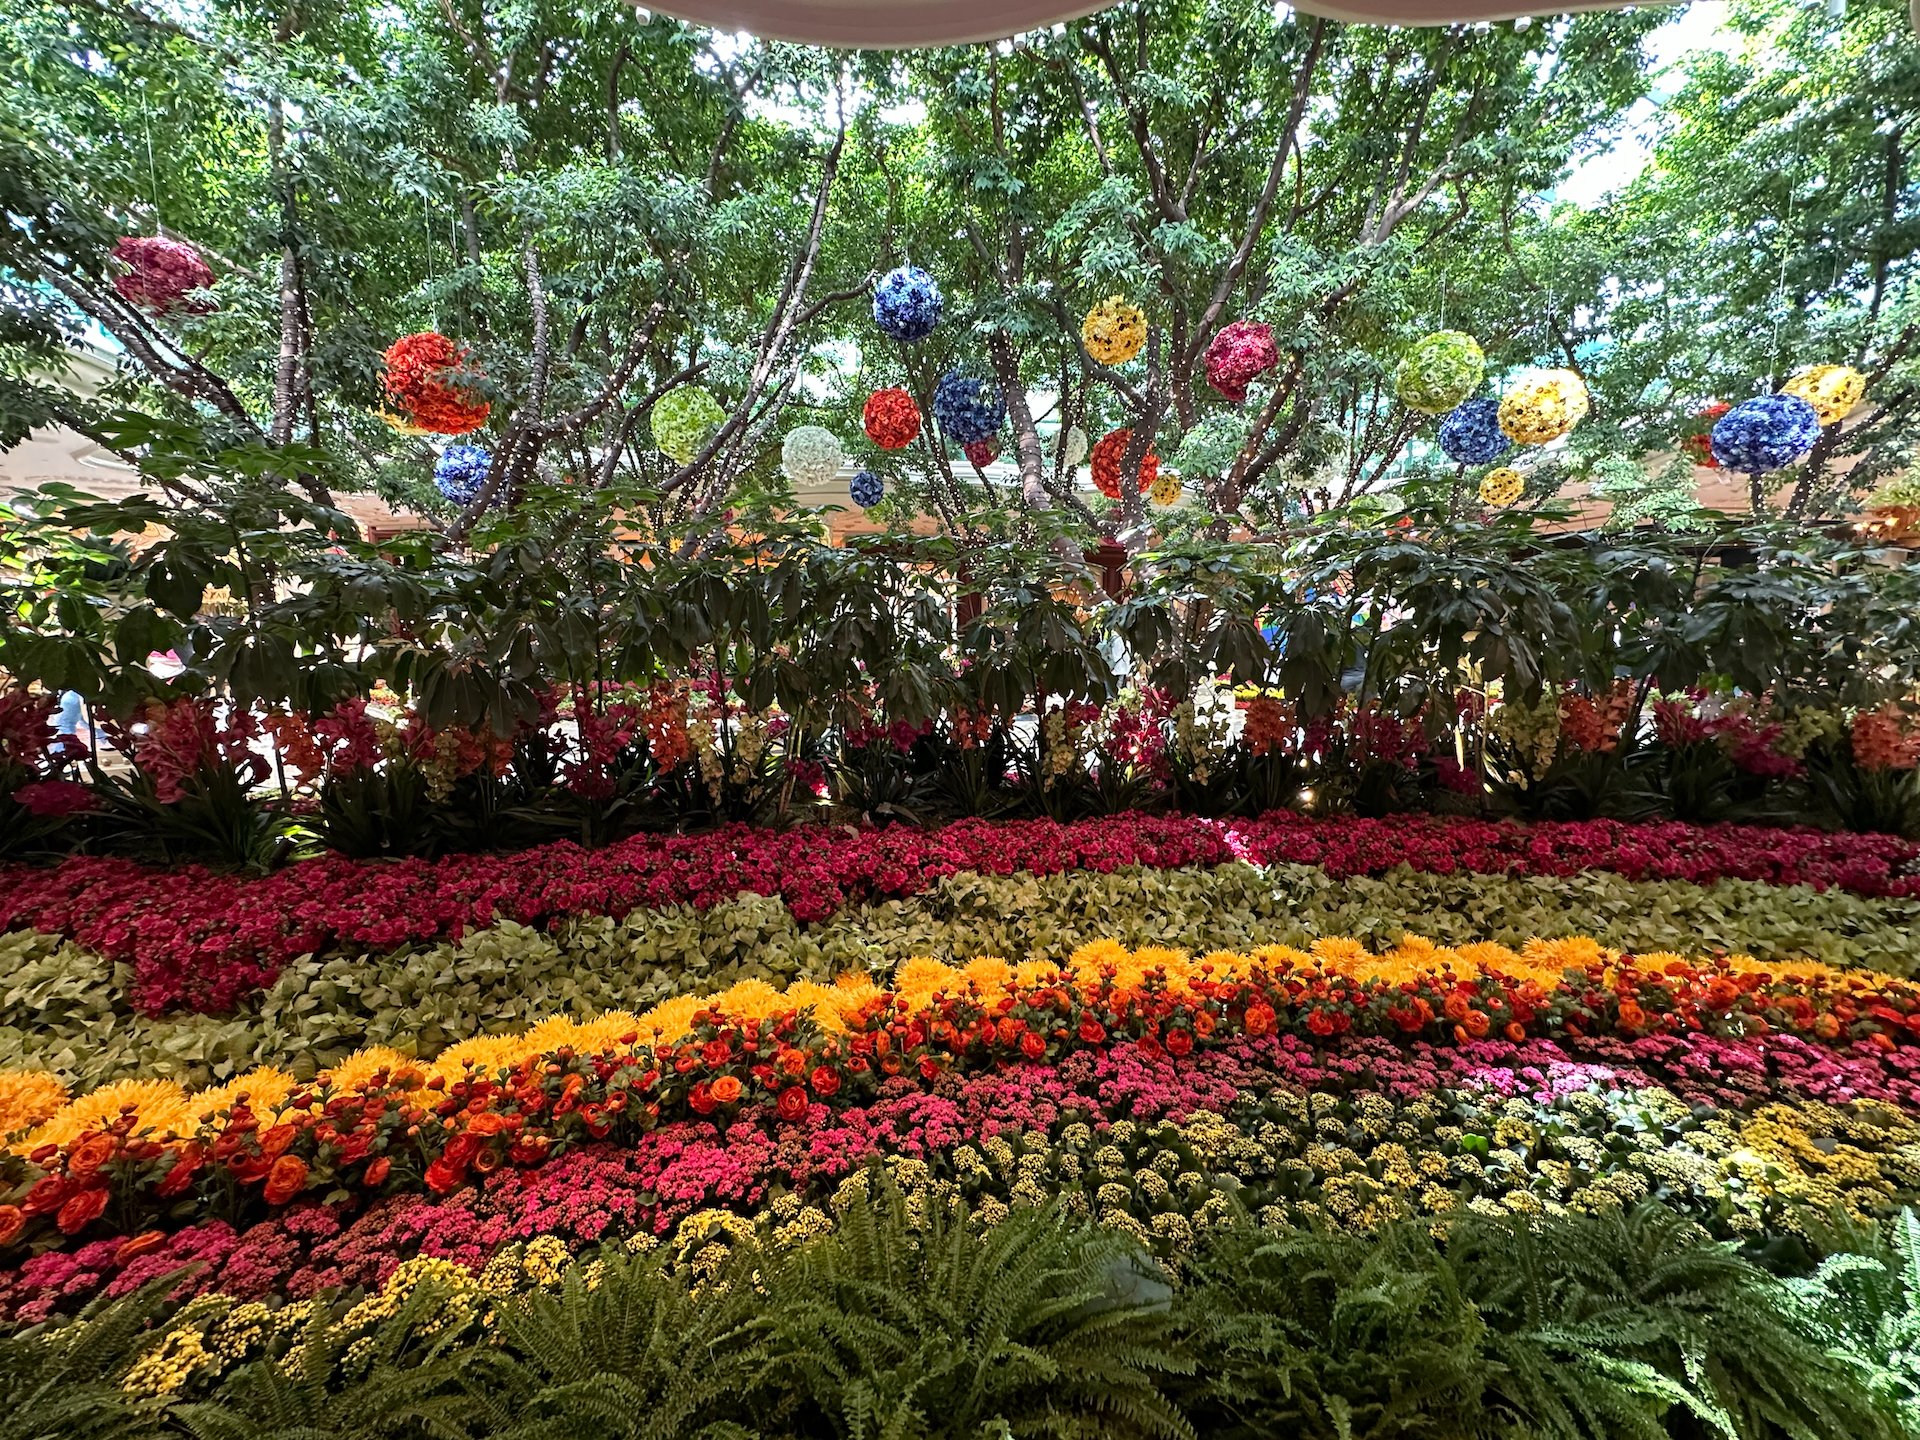  It’s hard to imagine how many flowers go into this type of display. 